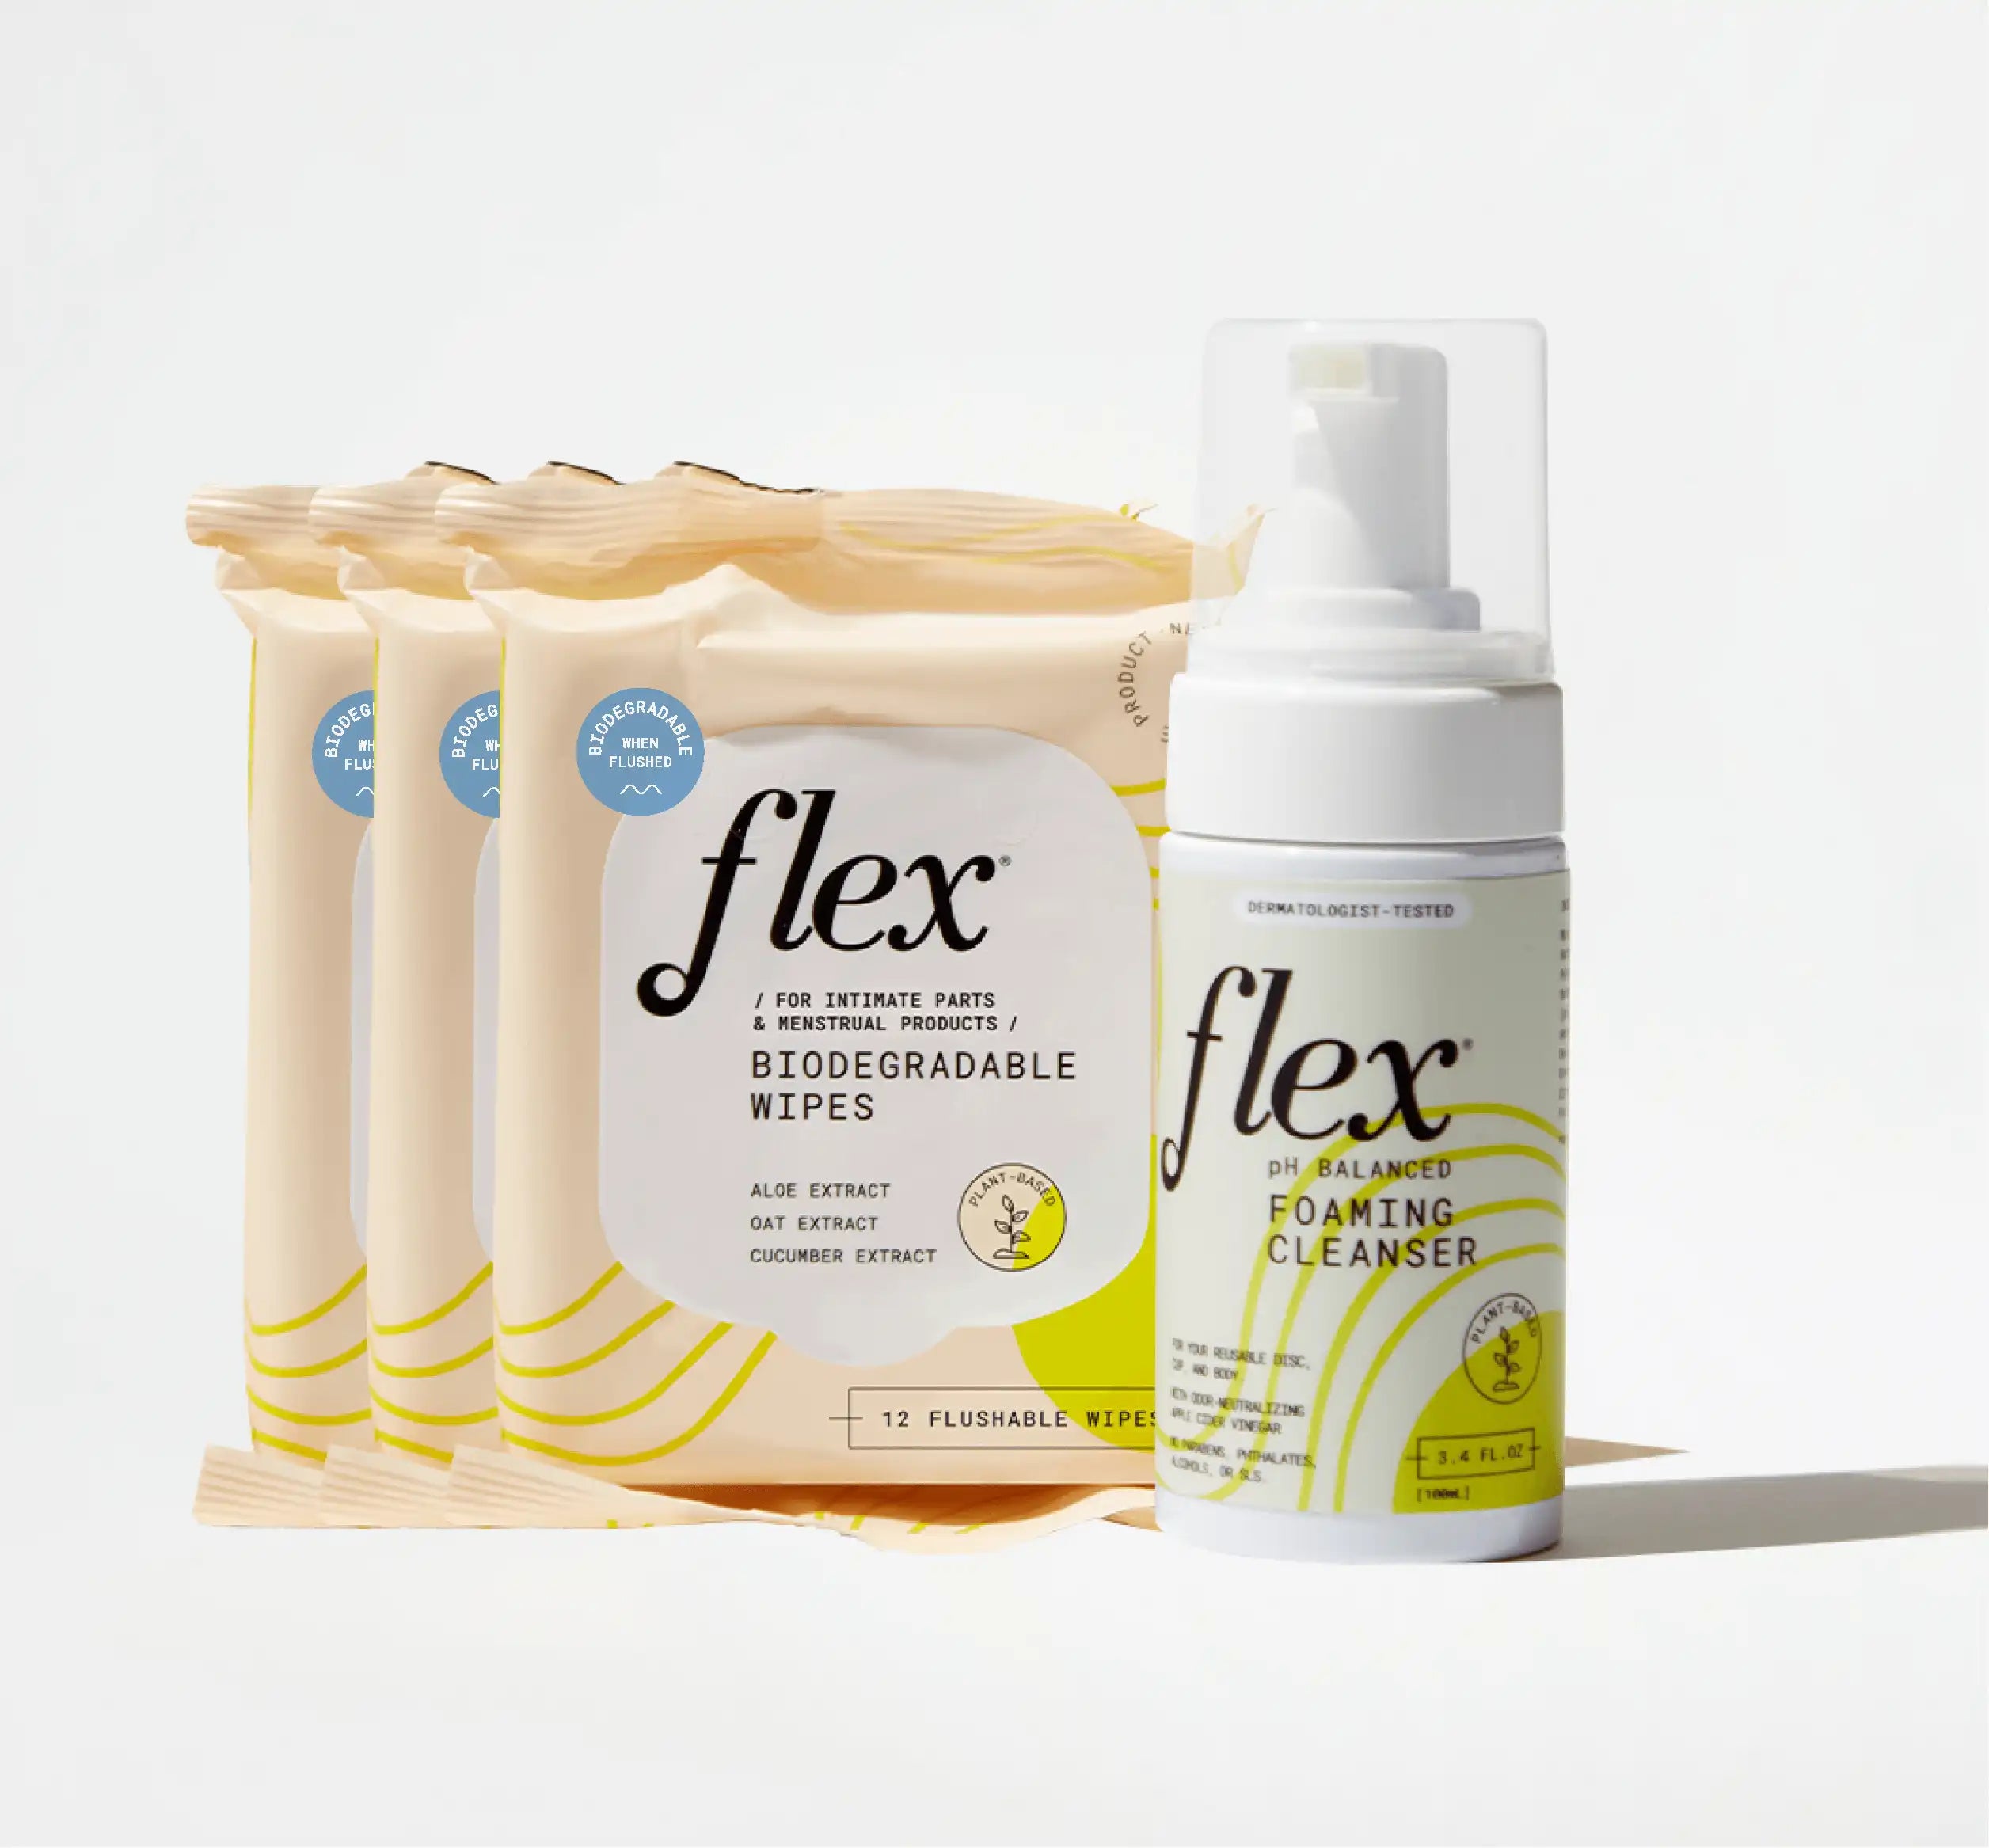 flex-foaming-wash-and-biodegradable-wipes-duo.webp